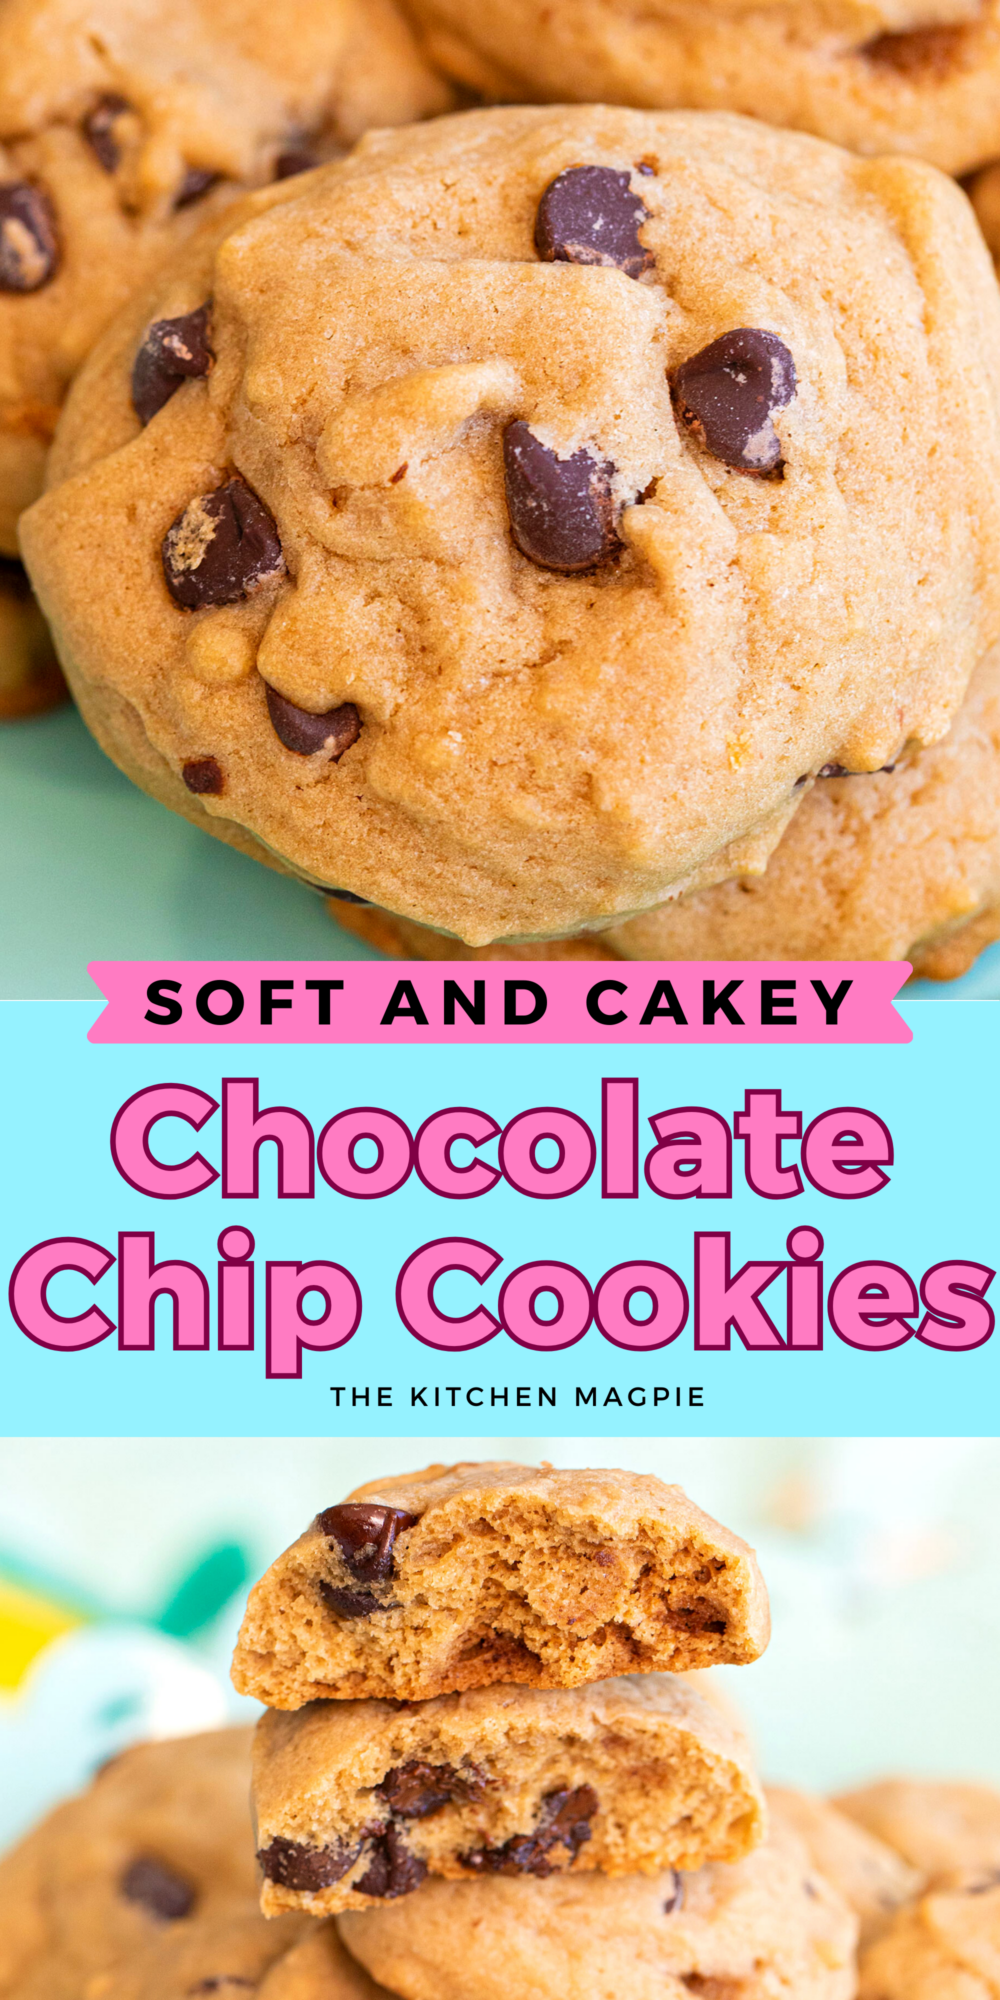 Chocolate chip cookies that are soft and pillowy inside. Perfect for those of you who like a cake-like texture to your cookies!